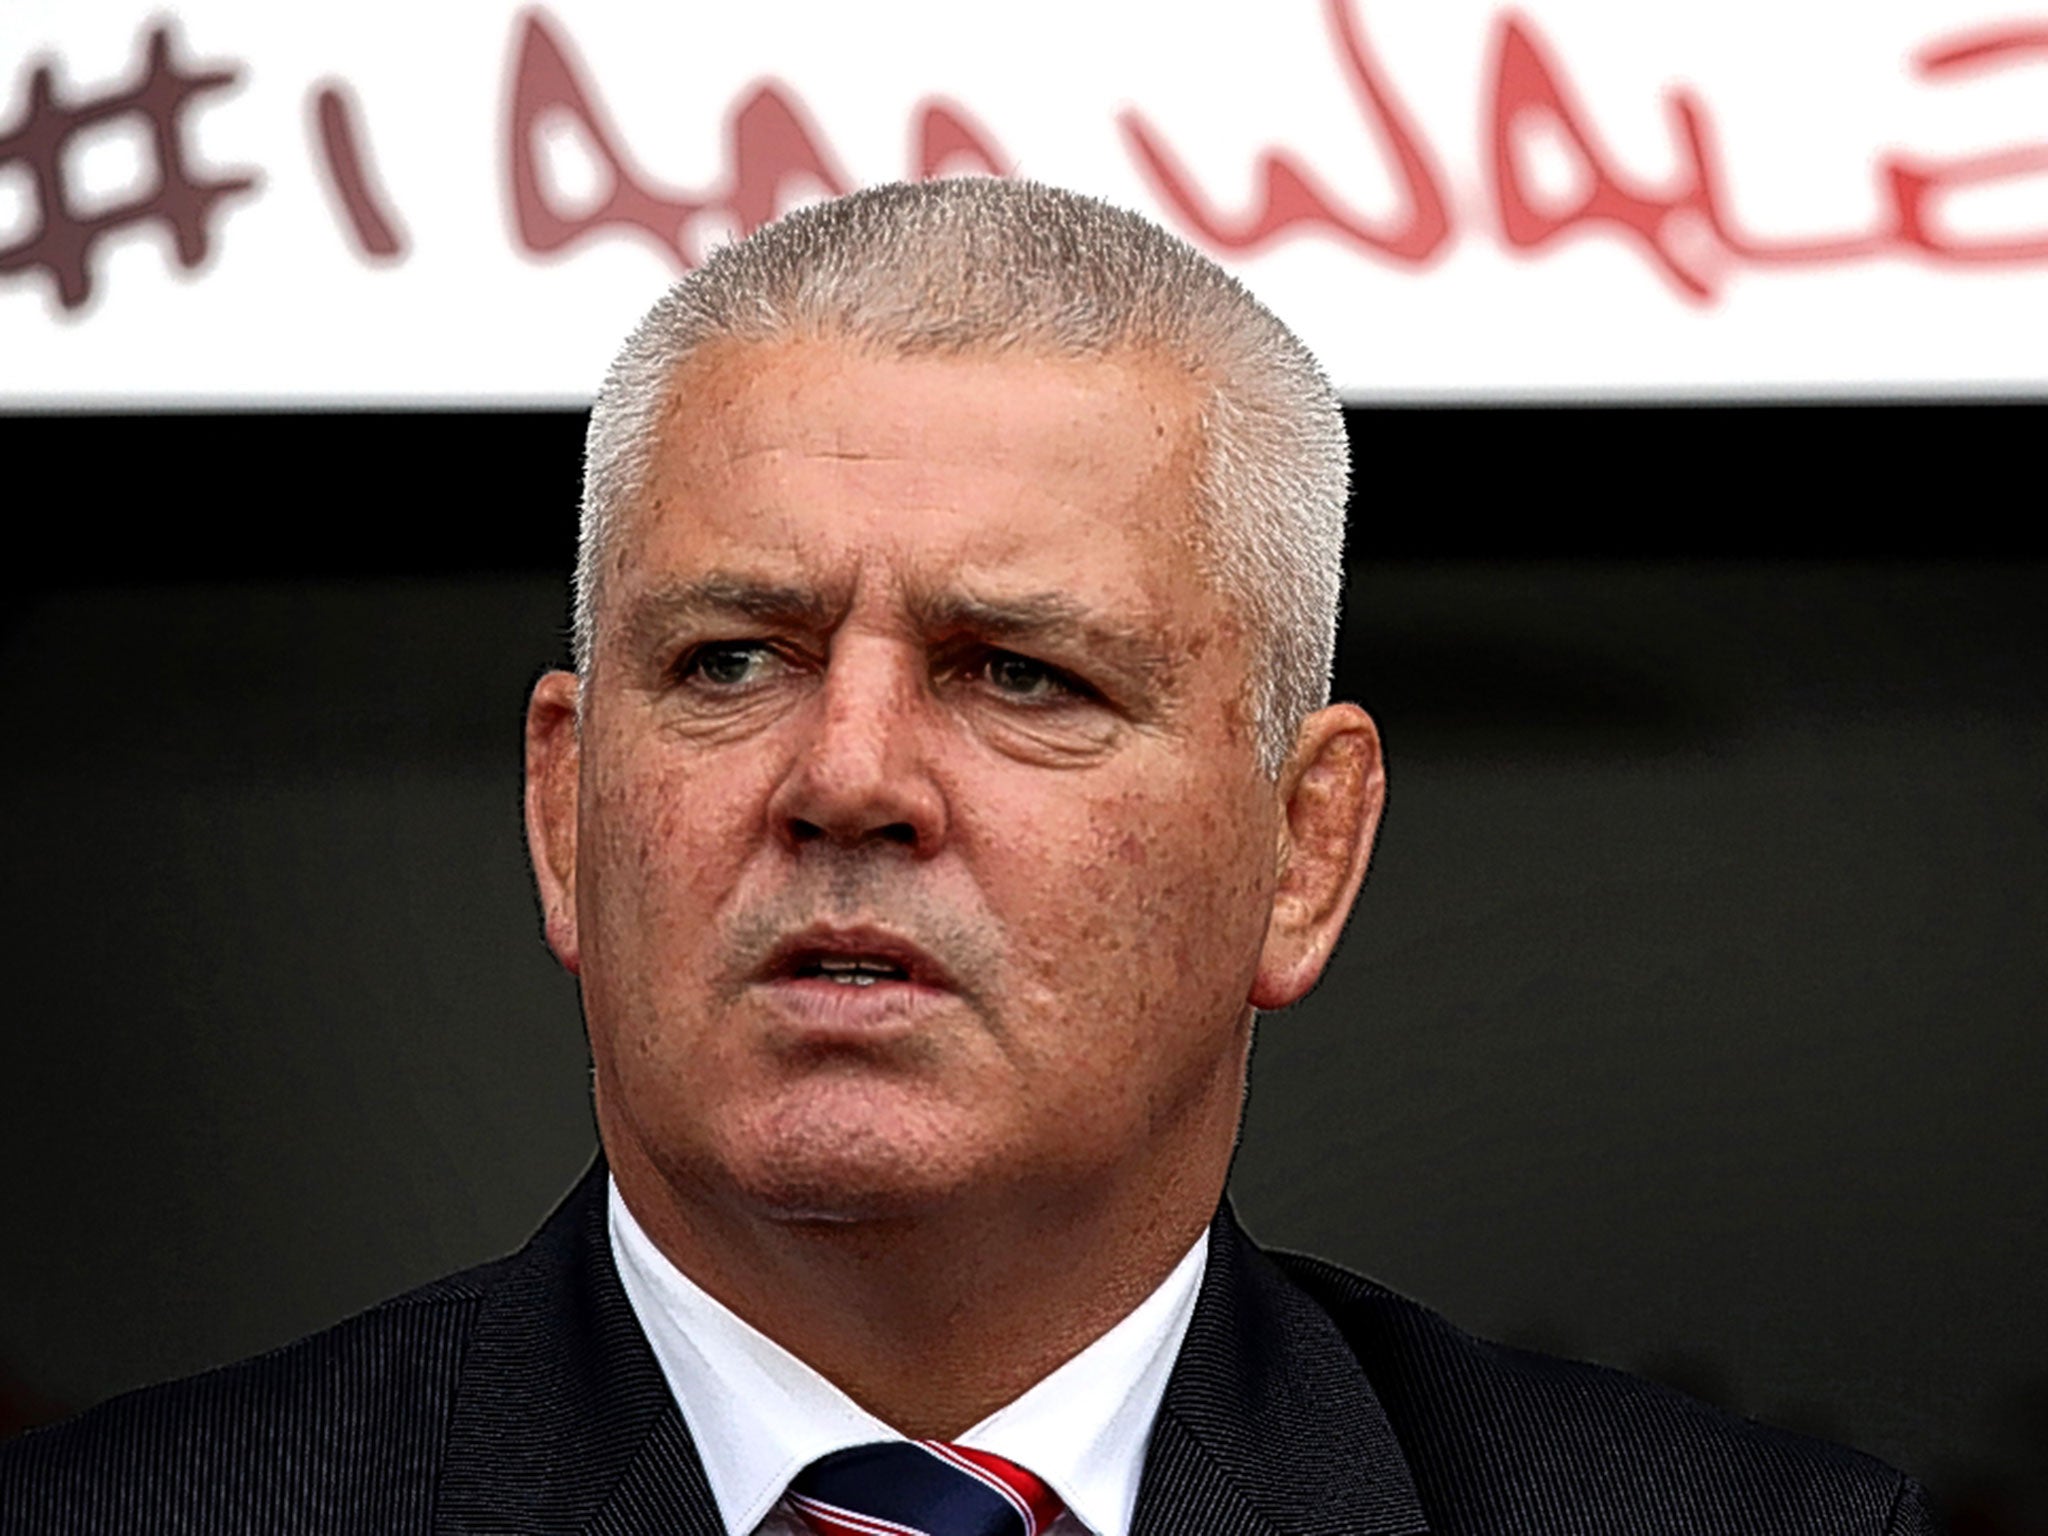 Warren Gatland believes rugby could learn from football on cup draws